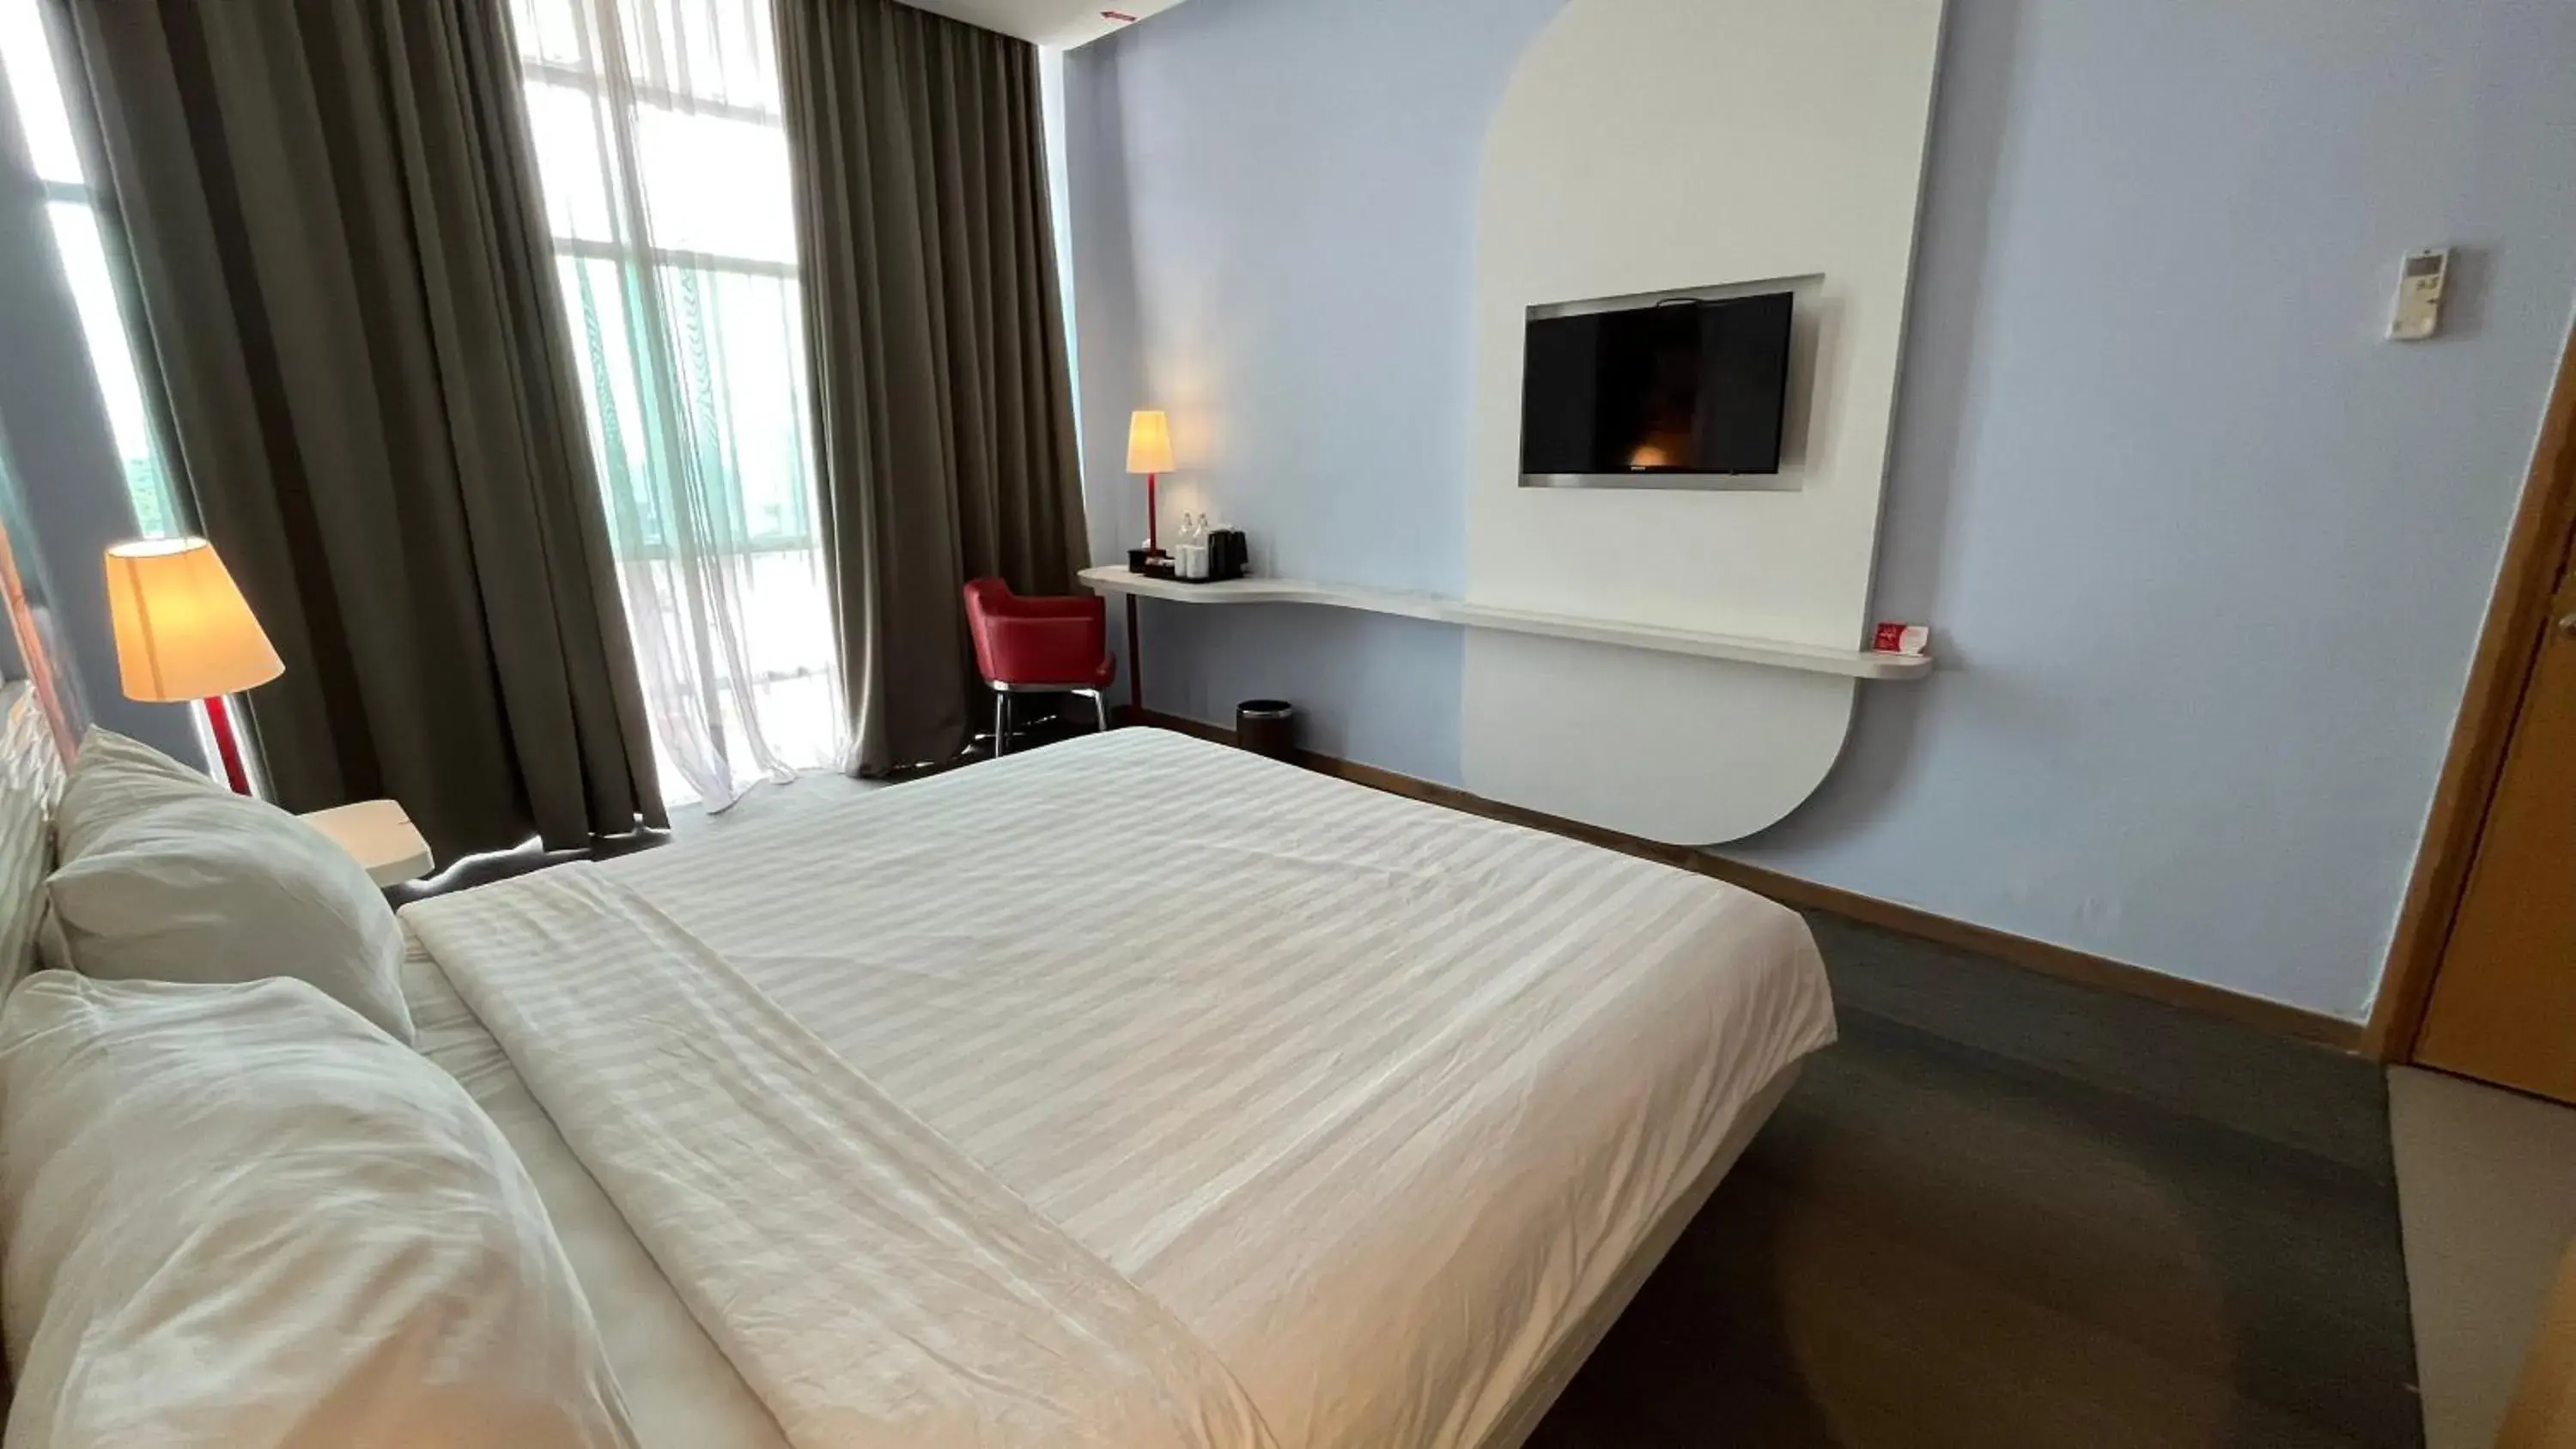 Bed in Luminor Hotel Metro Indah - Bandung by WH